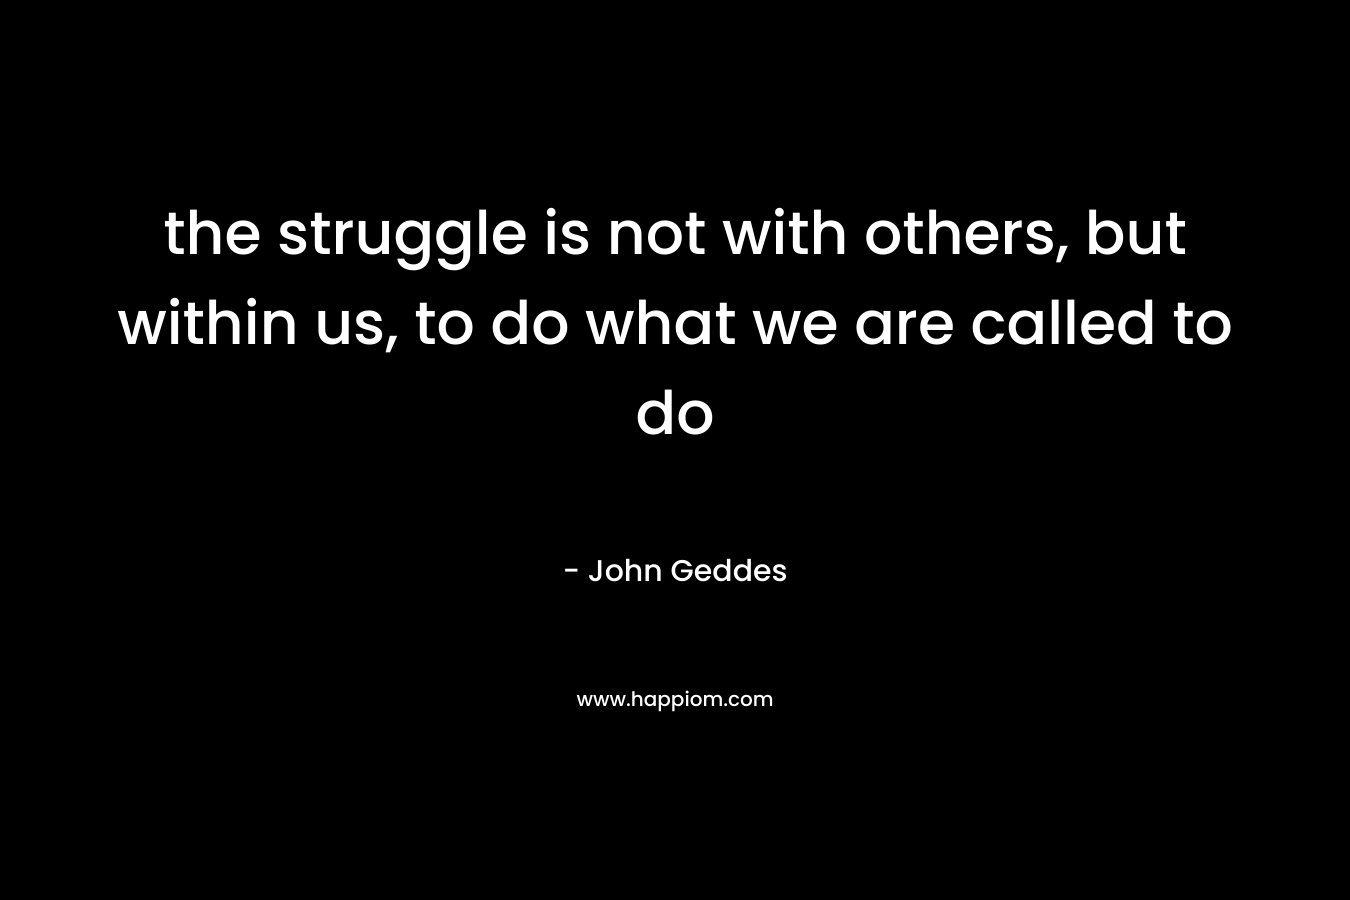 the struggle is not with others, but within us, to do what we are called to do